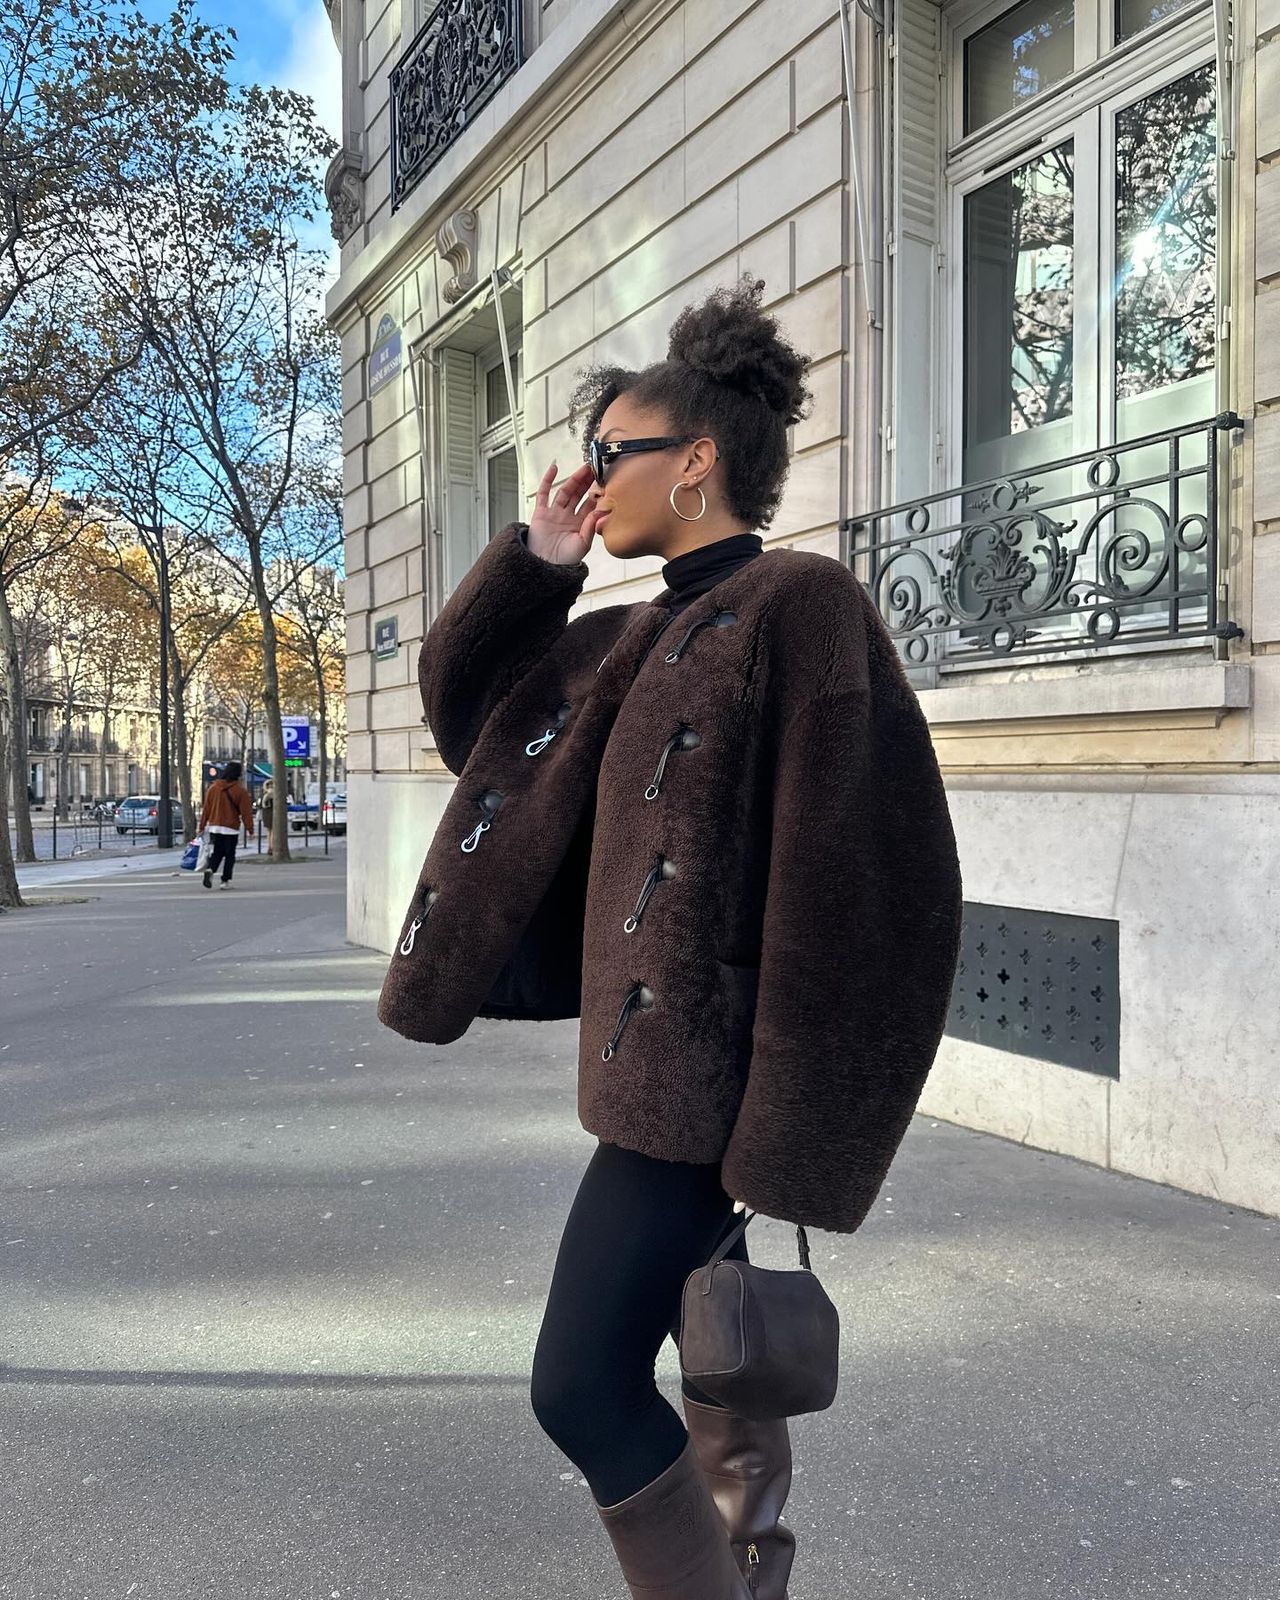 10 Winter Outfits That Look Polished Every Time | Who What Wear